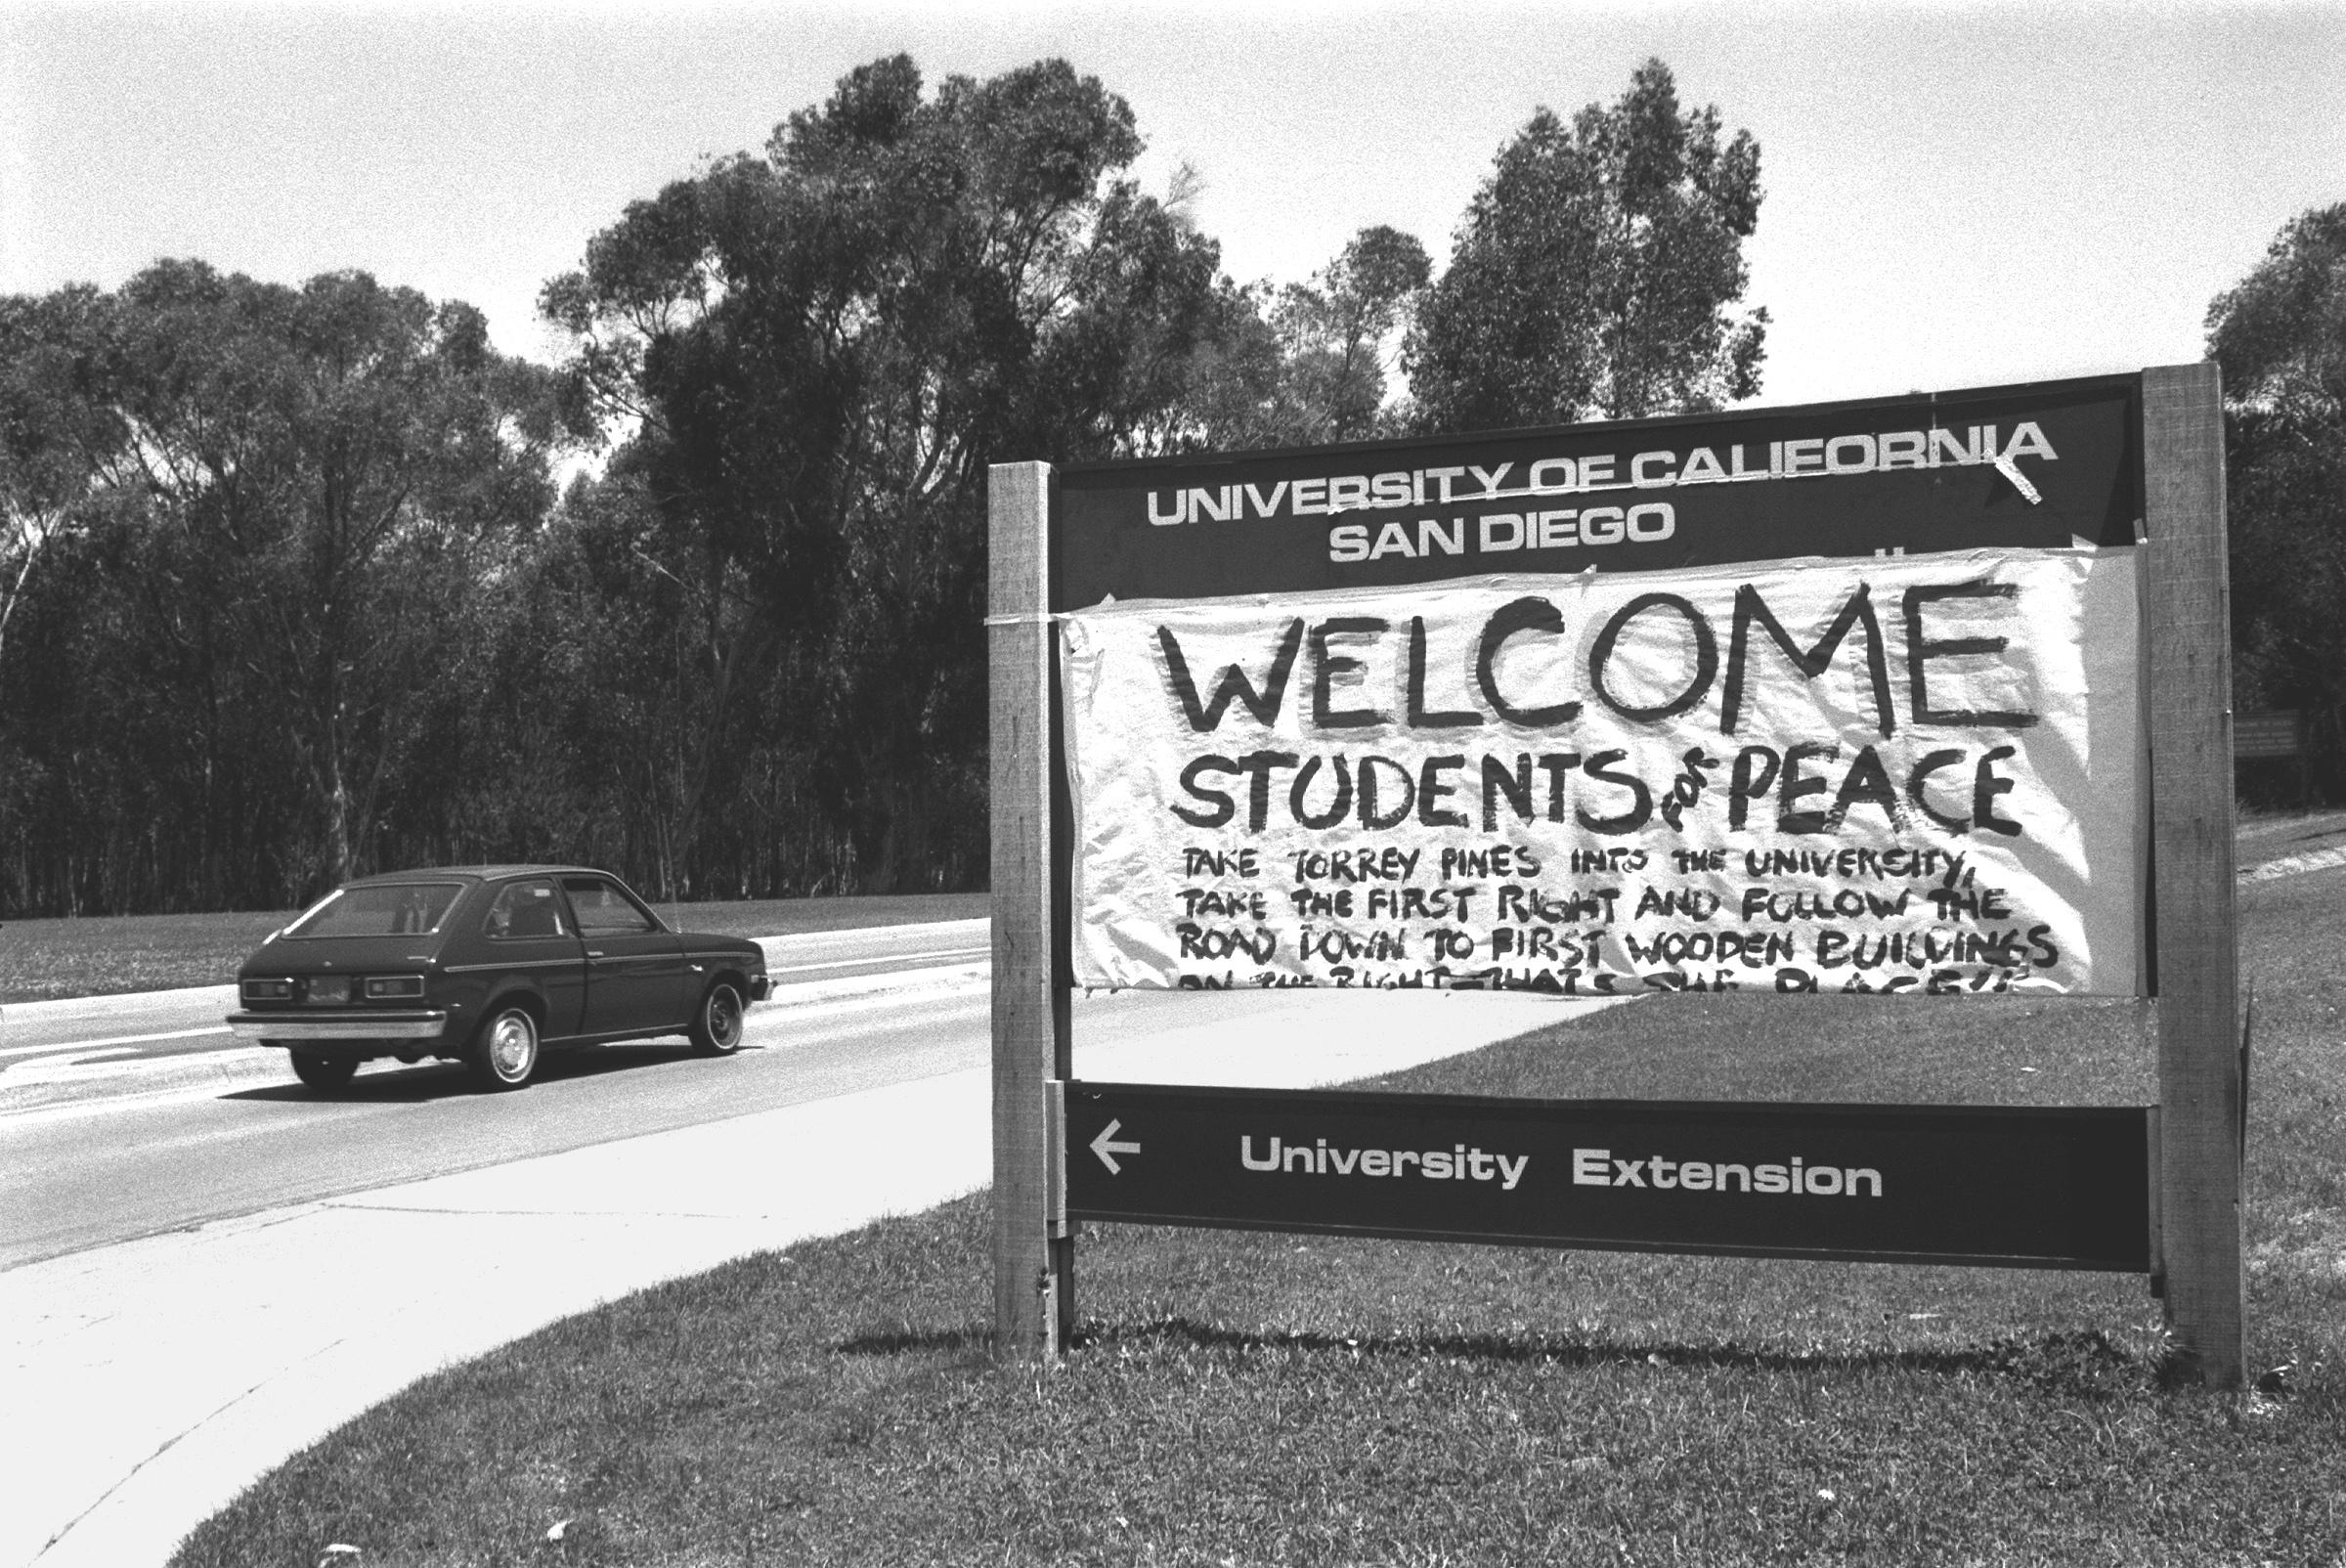 [Image 2. Anti war poster at the University of California, San Diego, 1970. Credits: Fred Lonidier]